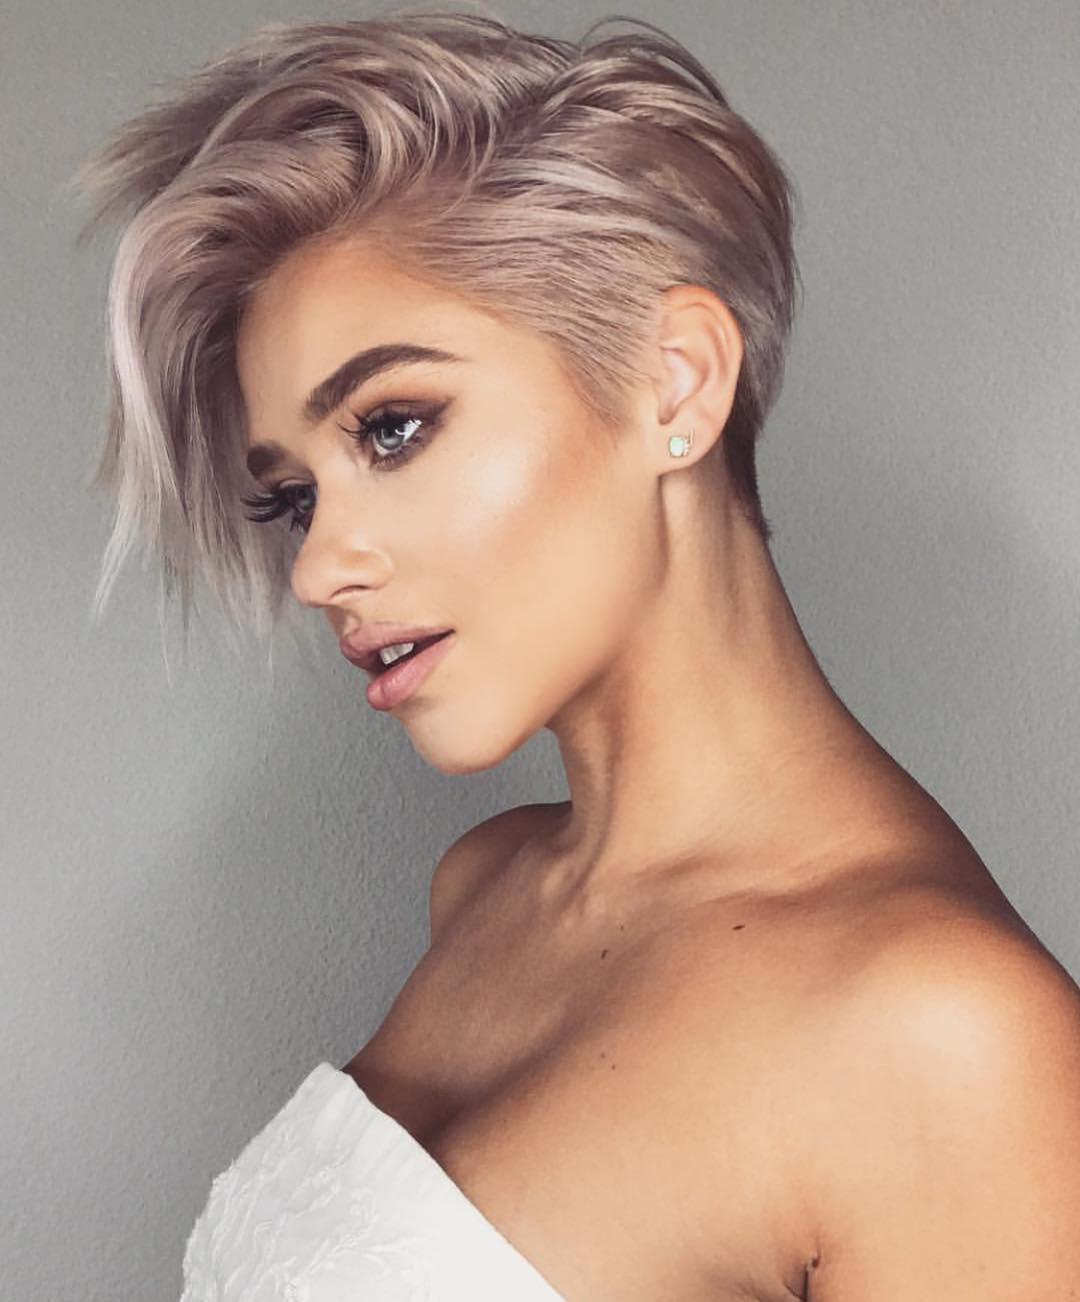 Female Hairstyles 2019
 10 Trendy Very Short Haircuts for Female Cool Short Hair